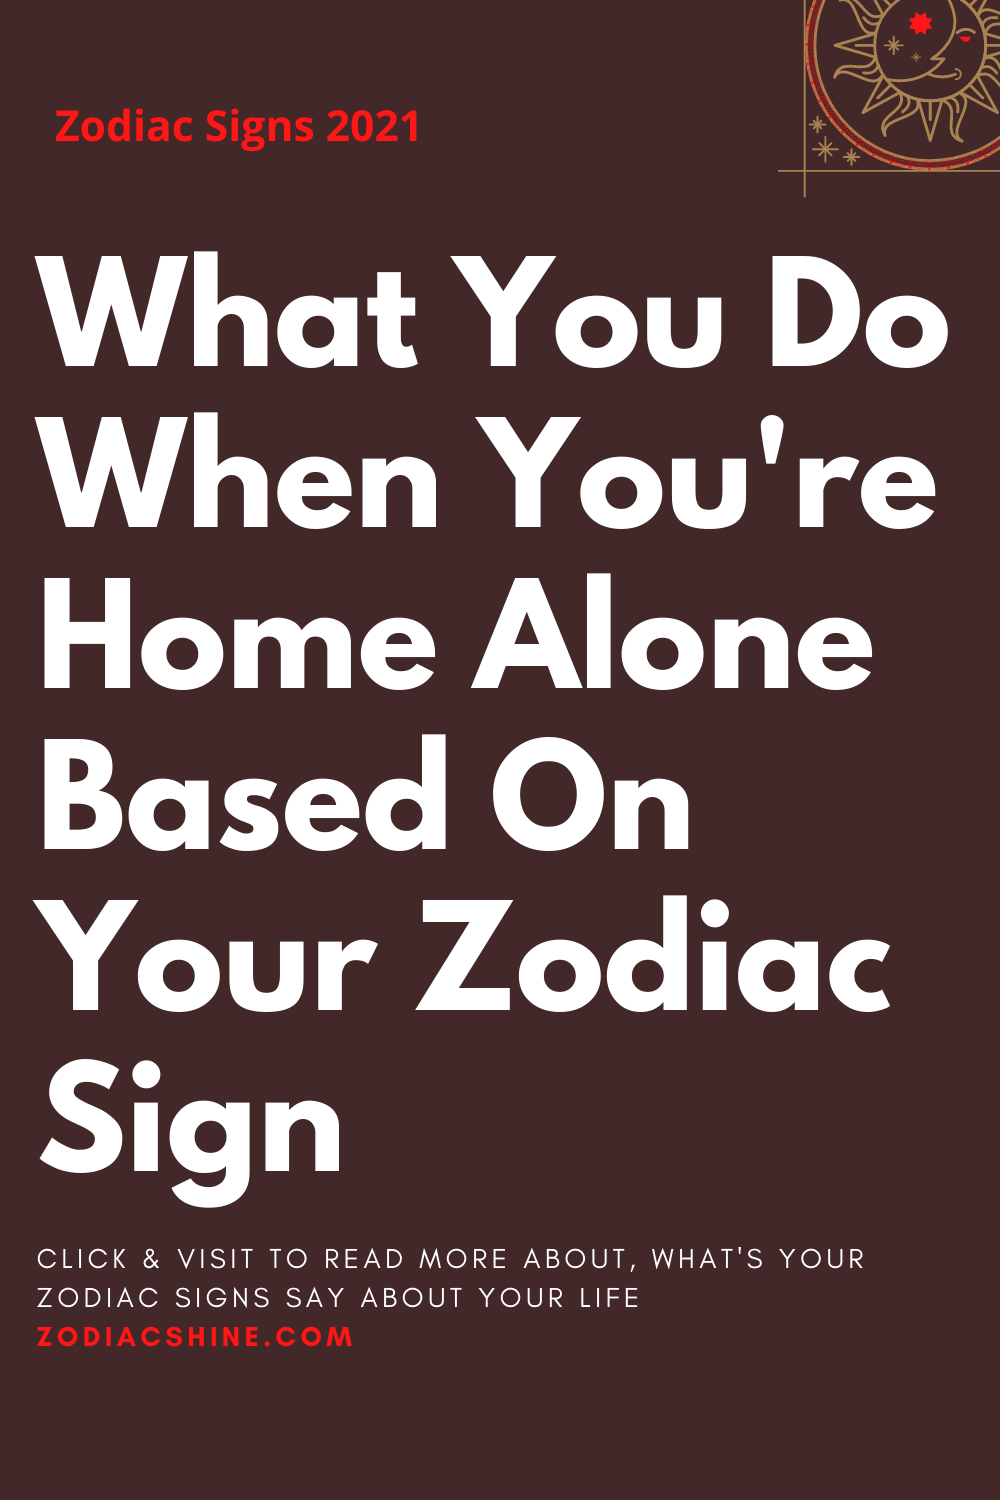 What You Do When You're Home Alone Based On Your Zodiac Sign